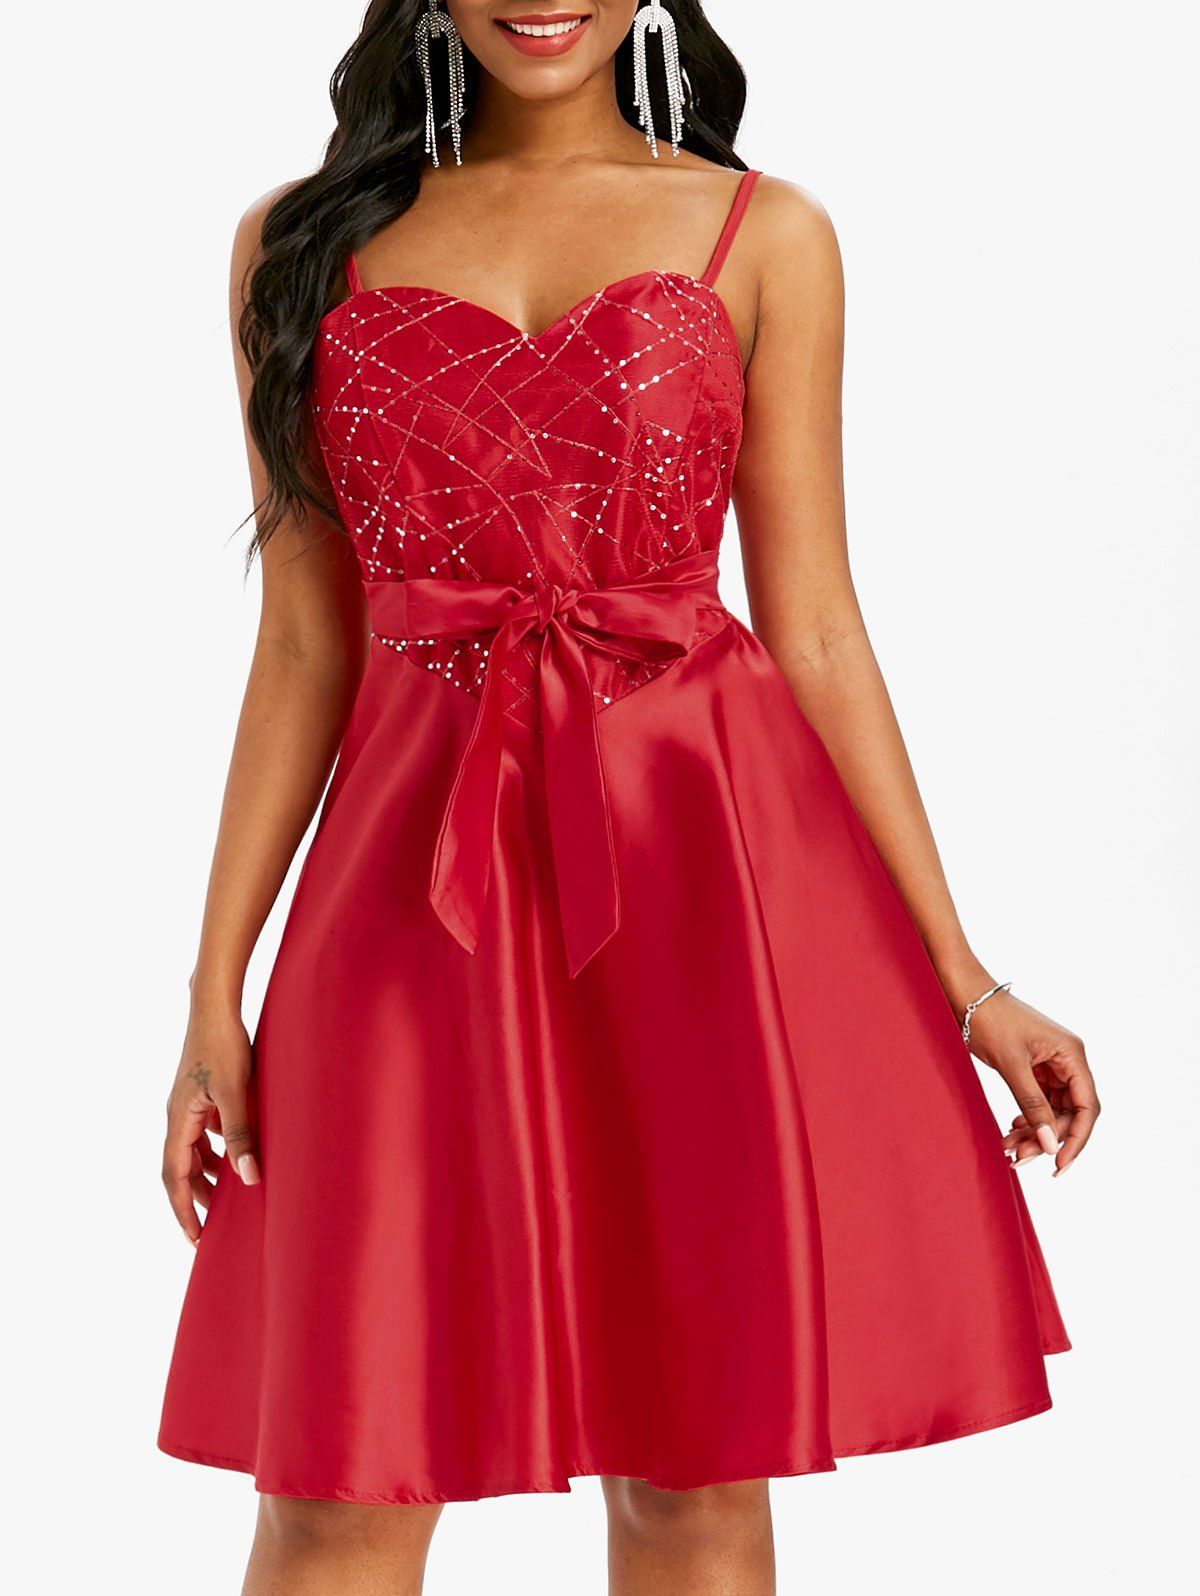 Sequined Lace Insert Bowknot Belted Cami Party Dress - RED S